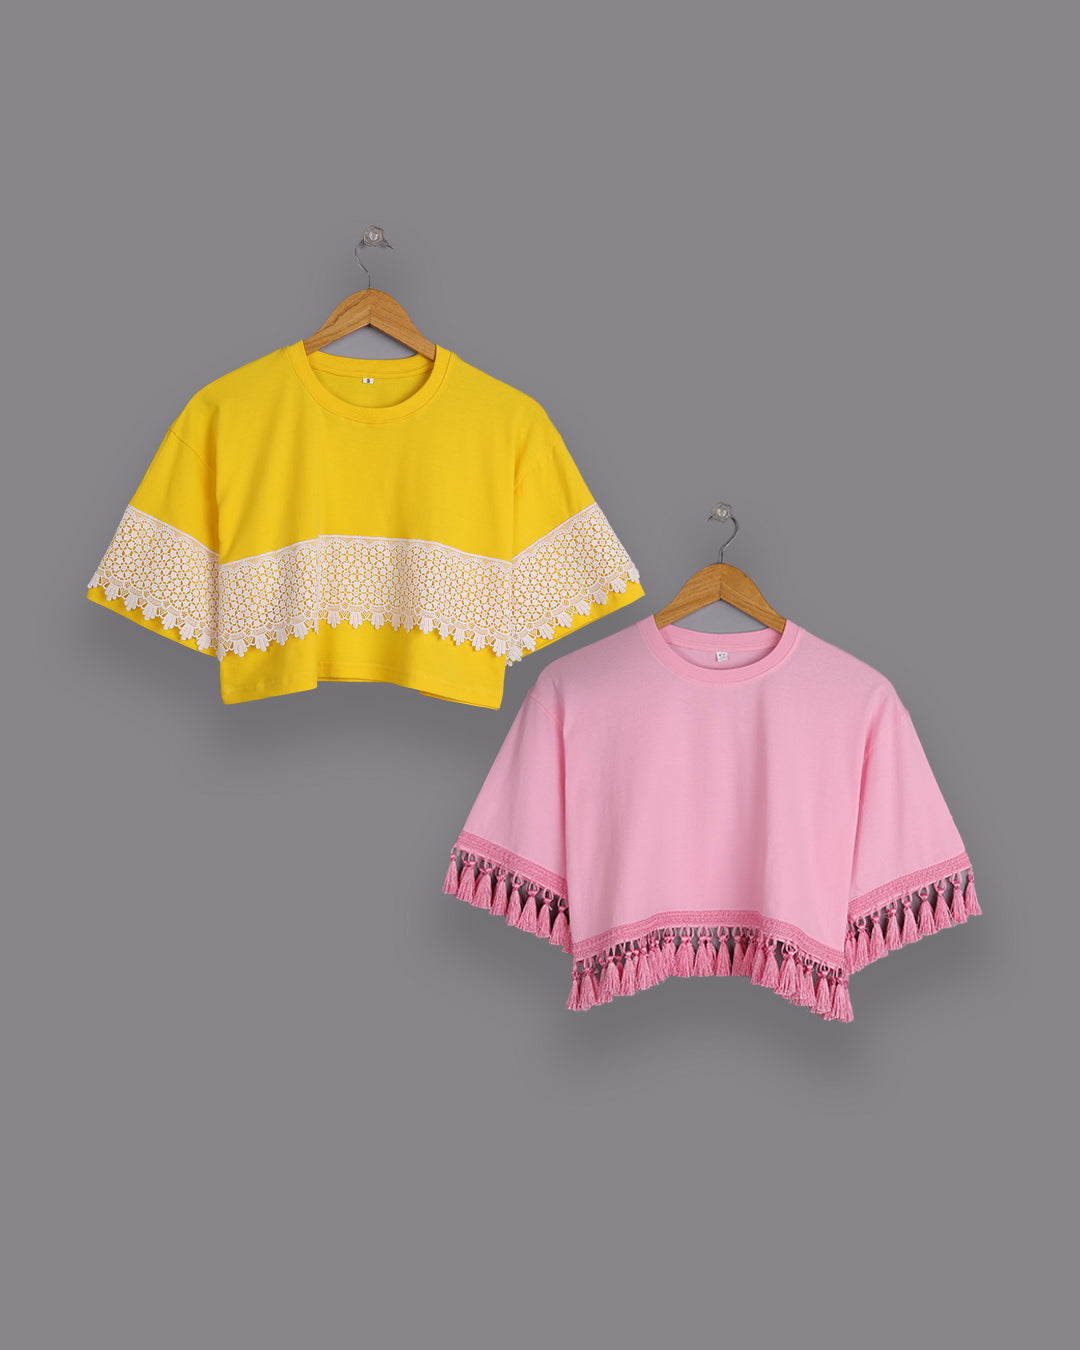 2 Oversized Women's Tops: Yellow with White Lace & Pink with Pink Tassels, 100% Cotton